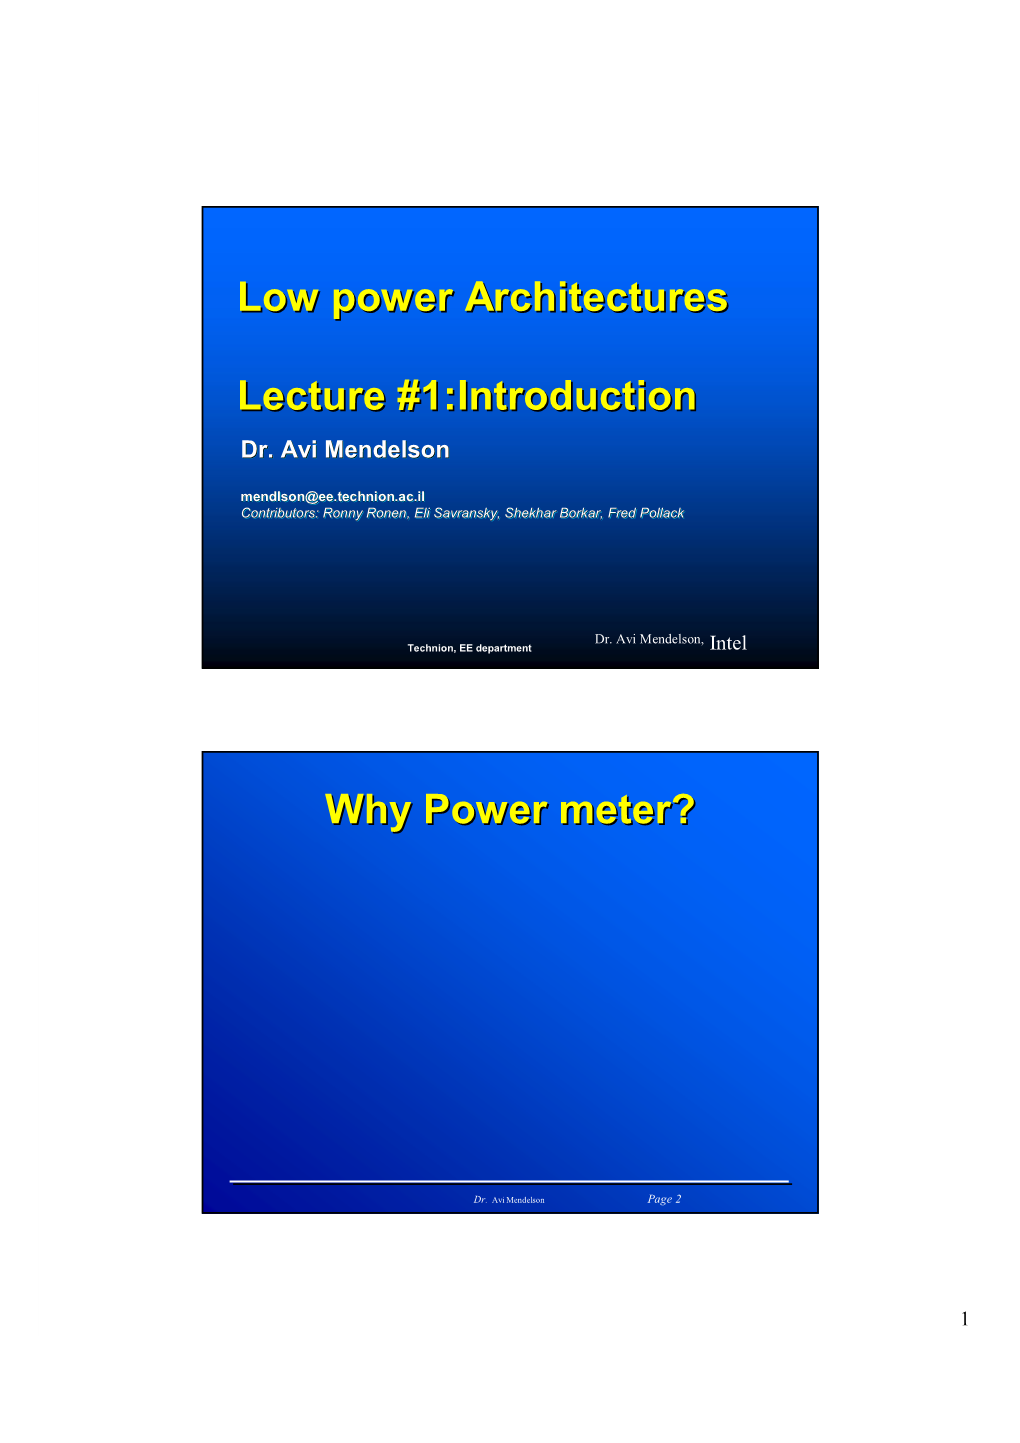 Low Power Architectures Lecture #1:Introduction